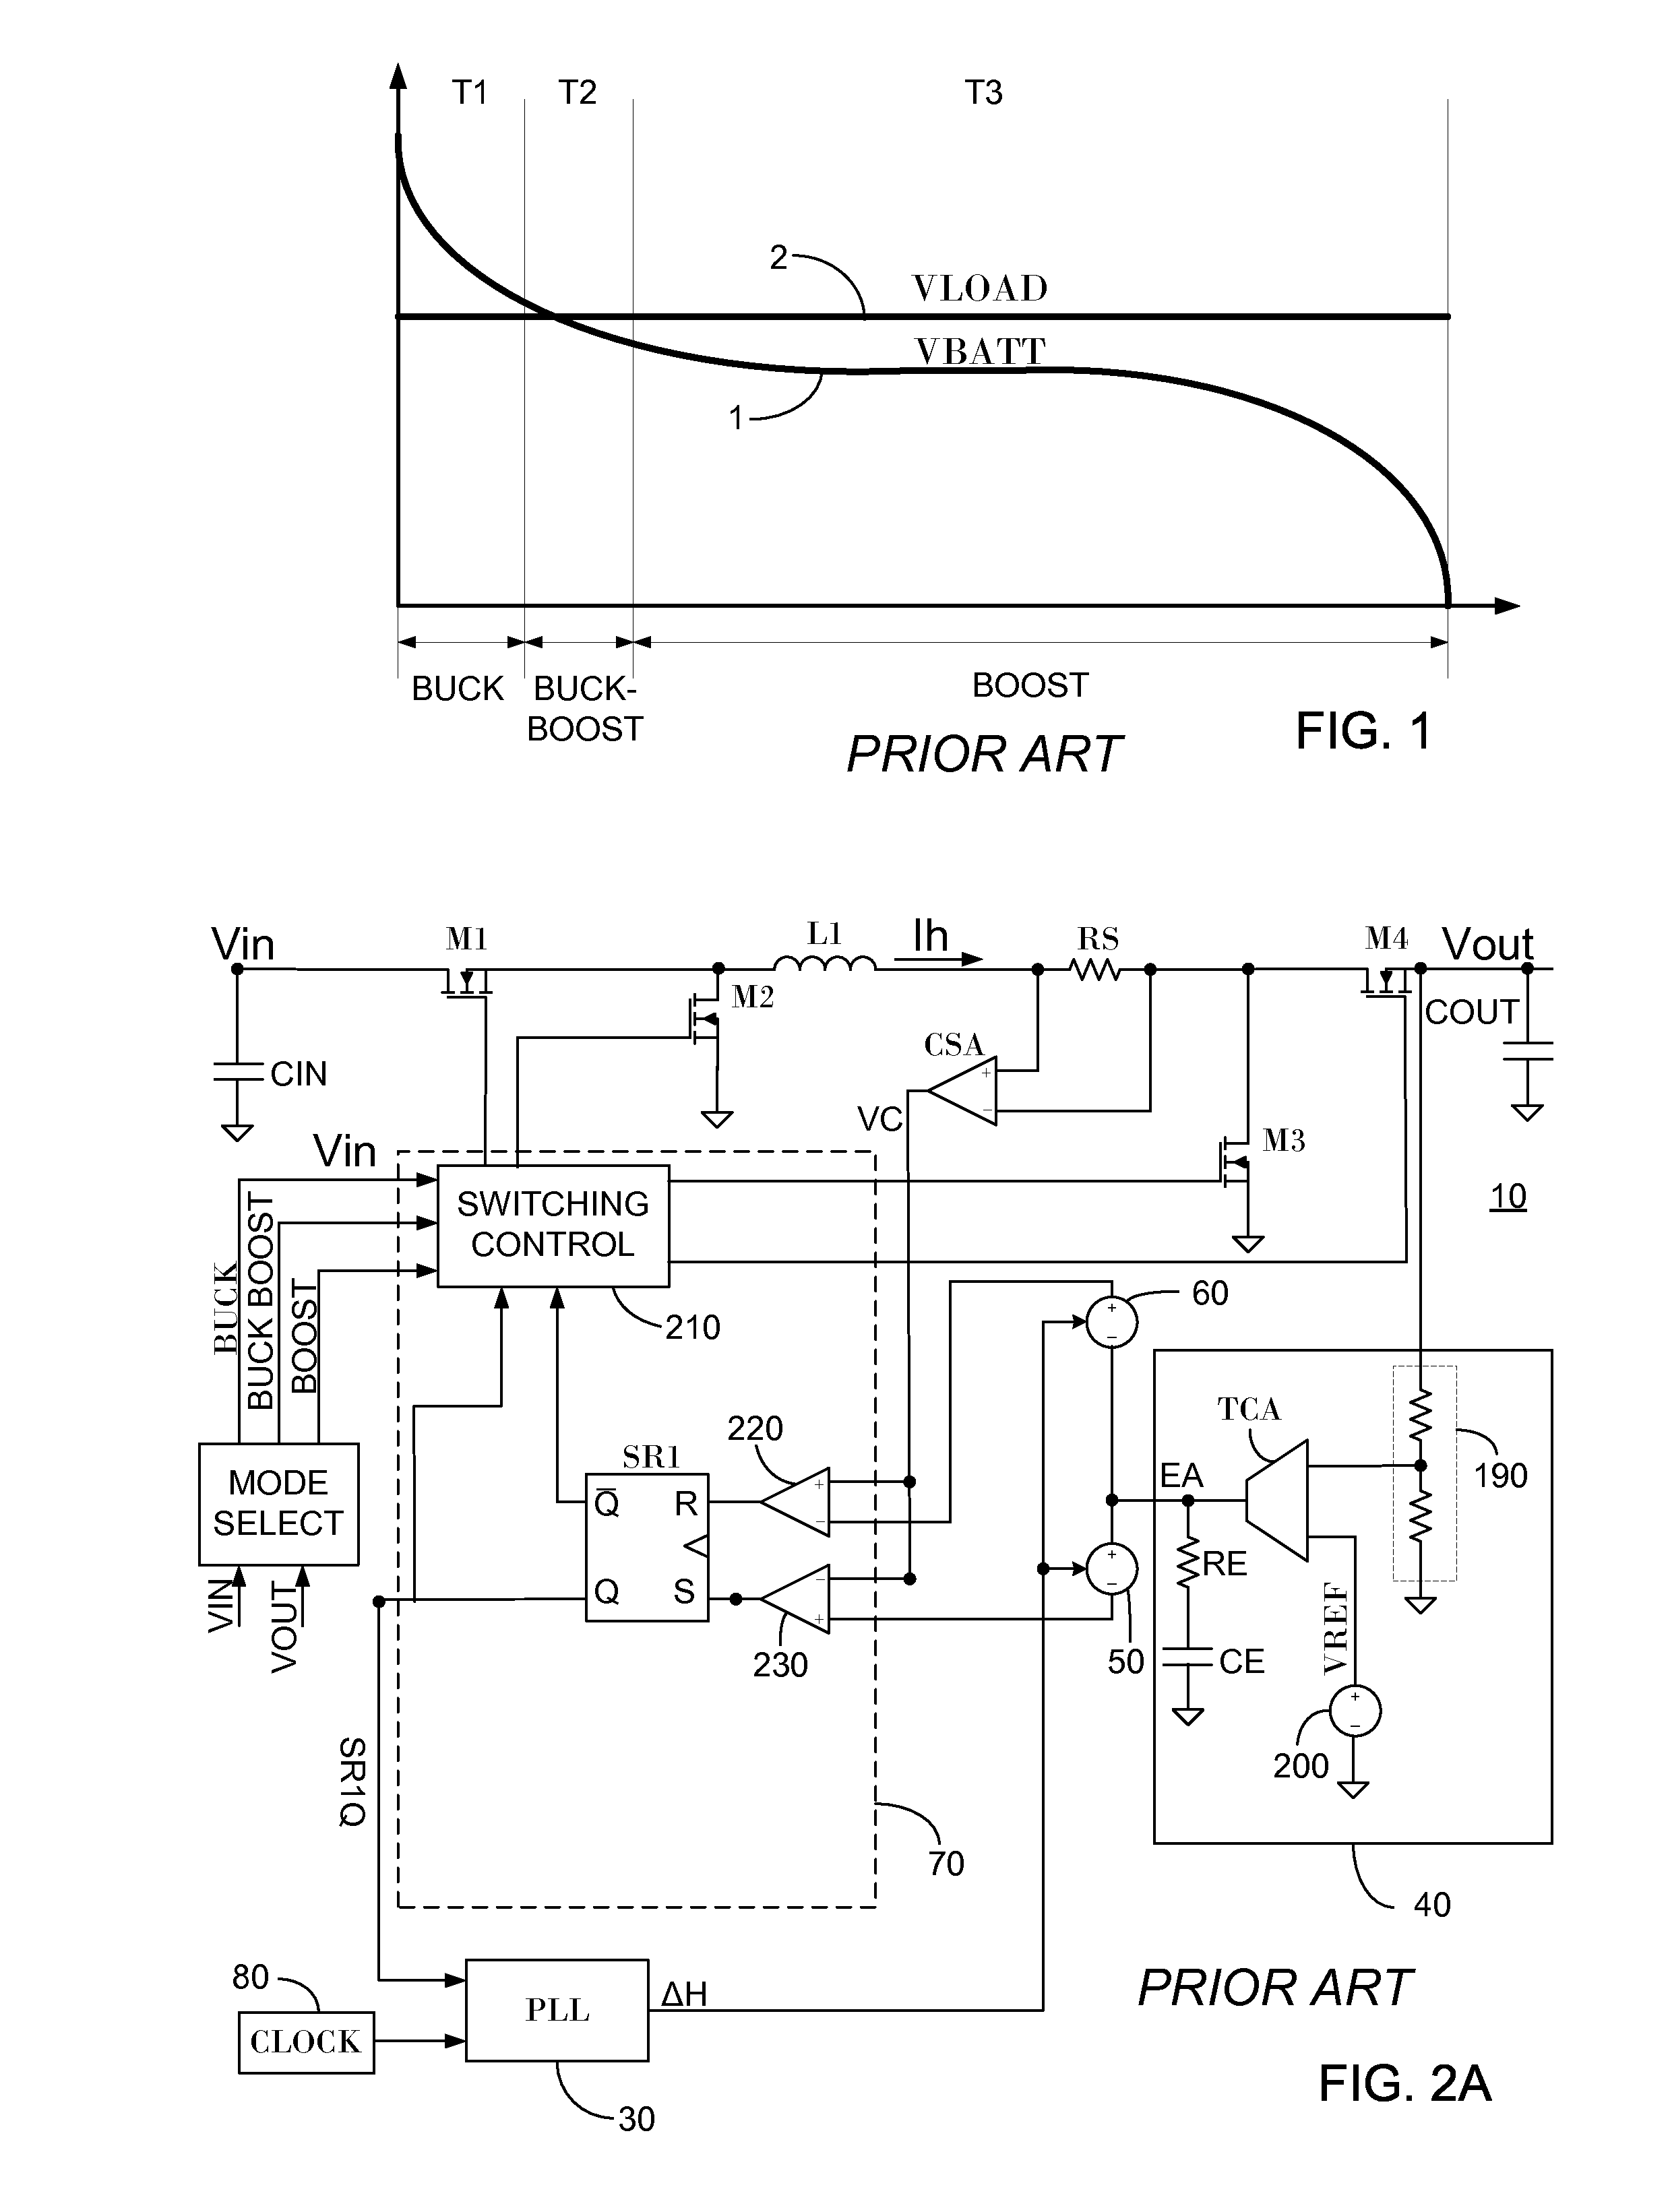 Hysteretic current mode control converter with low, medium and high current thresholds